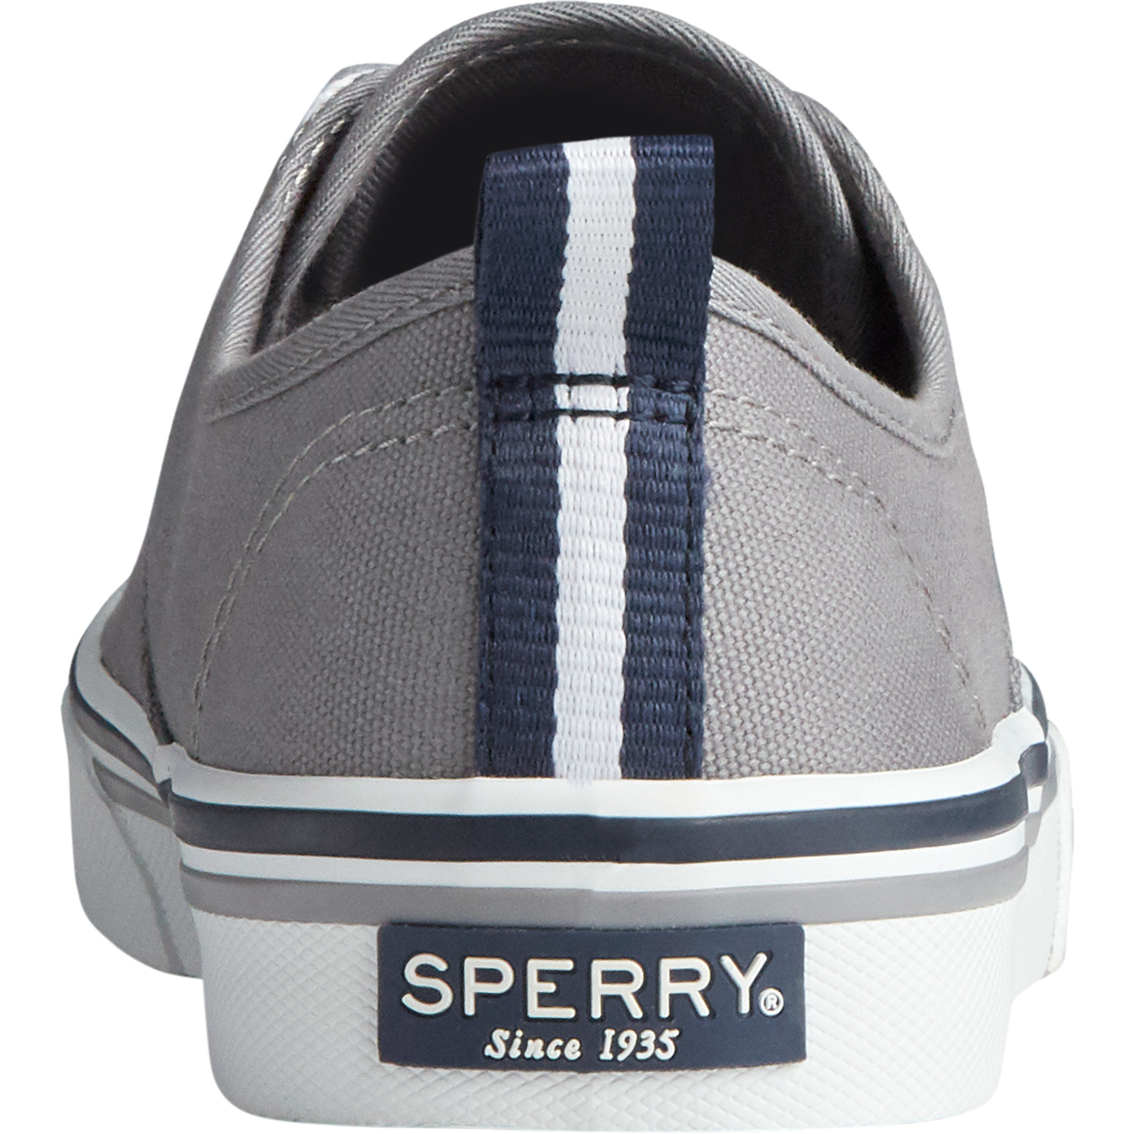 Sperry Women's Crest Cvo Canvas Sneakers | Sneakers | Shoes | Shop The ...